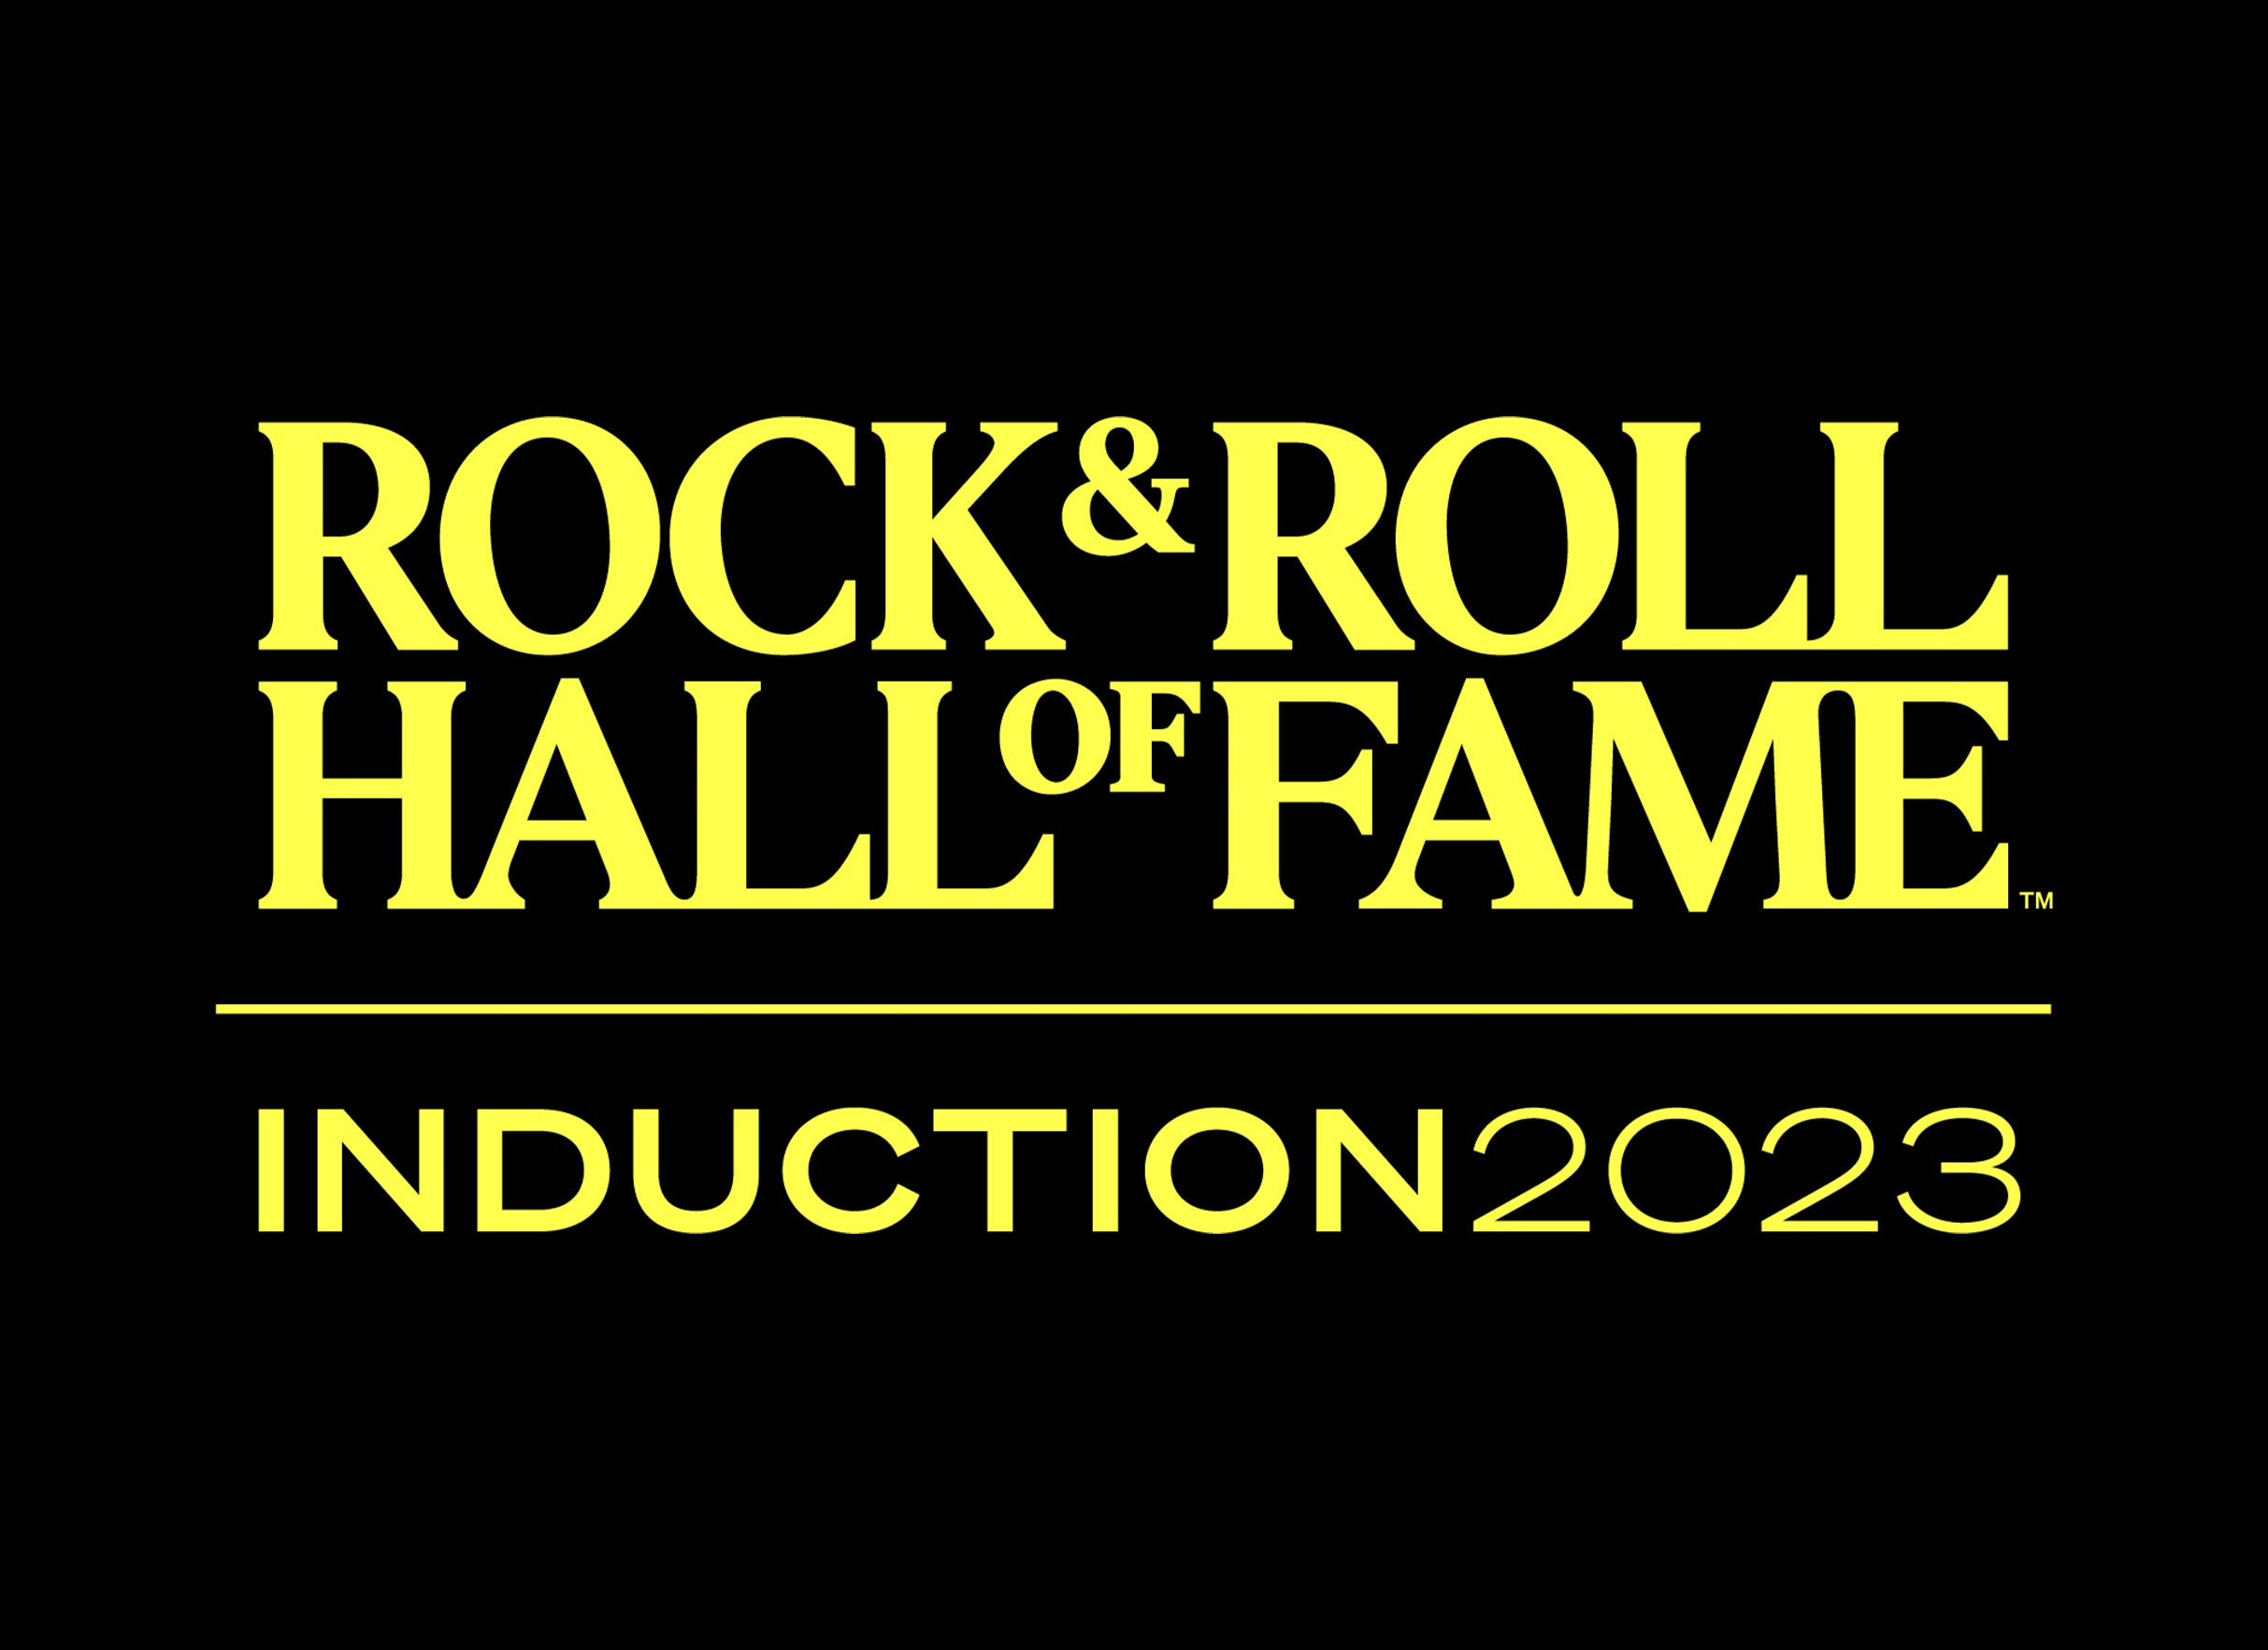 38th Annual Rock & Roll Hall of Fame Induction Ceremony pre-sale passcode